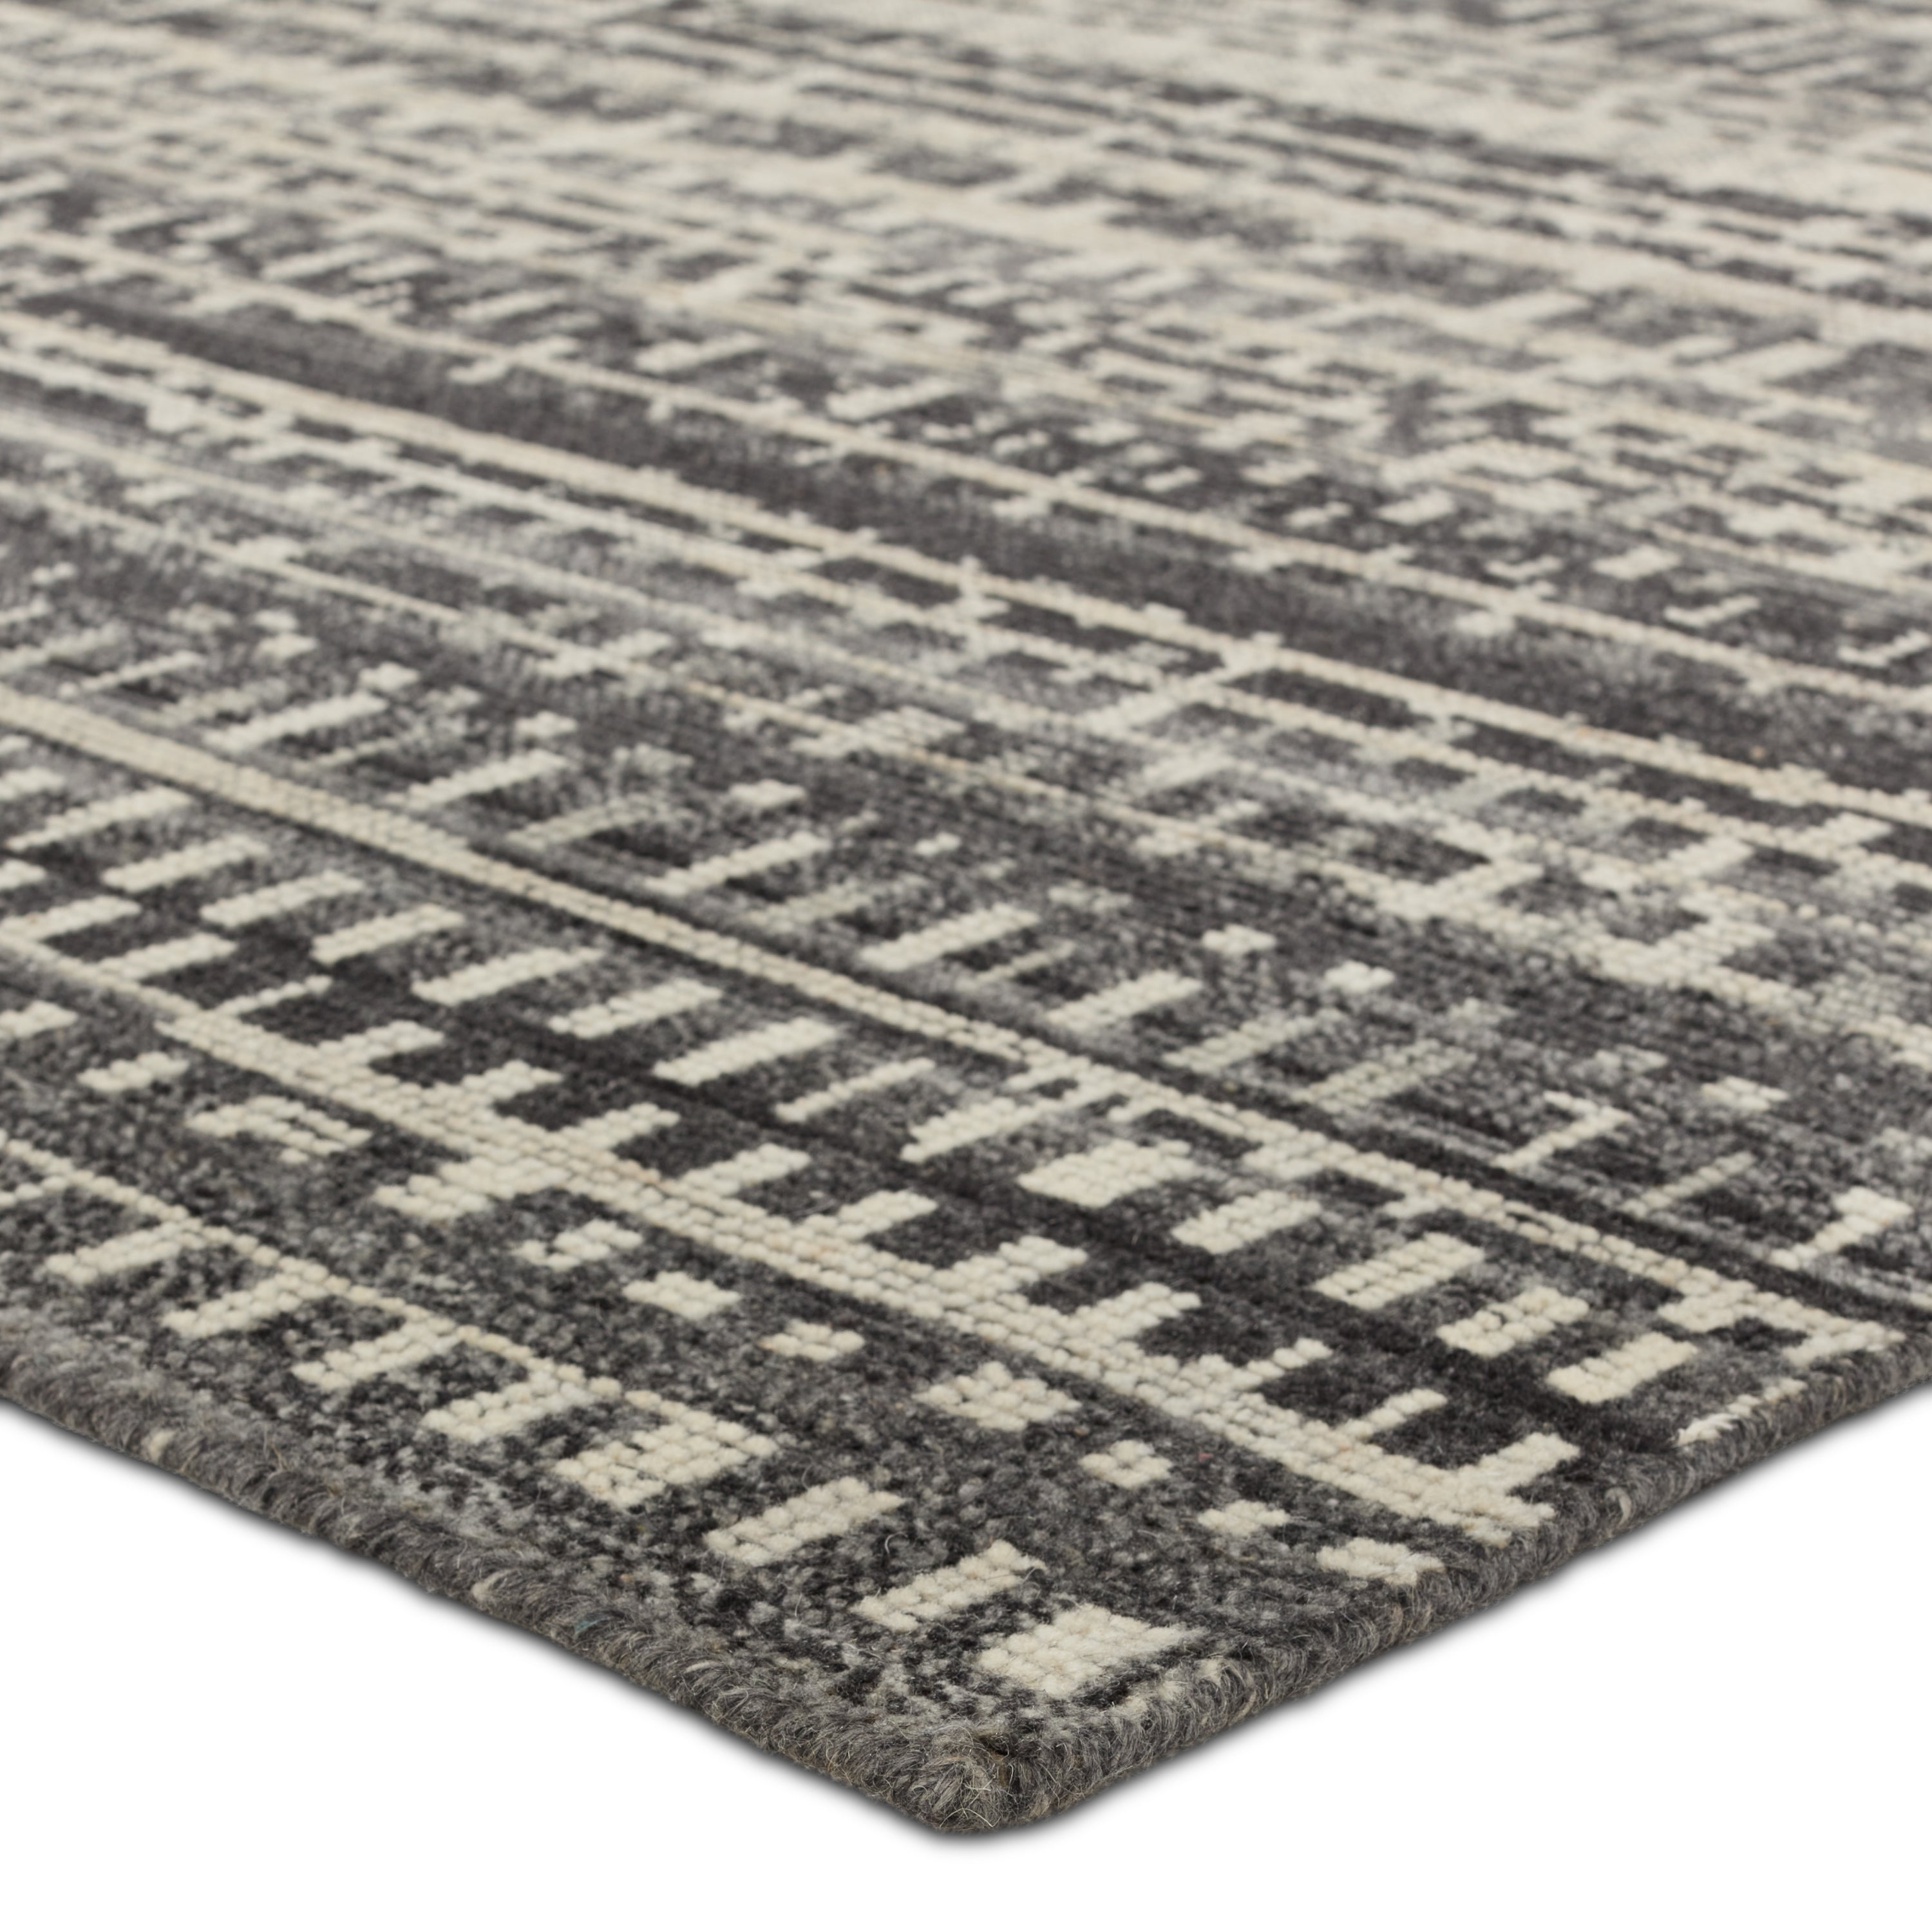 The Rize collection offers intricate and delicately designed global patterns to the modern home. The luxurious Jamaal area rug showcases a striped, linear motif in a classic gray, cream, and black colorway. This accent's hand-knotted wool construction ensures timeless durability and a stunning presence in bohemian spaces.  Amethyst Home provides interior design, new construction, custom furniture, and area rugs in the Dallas metro area.